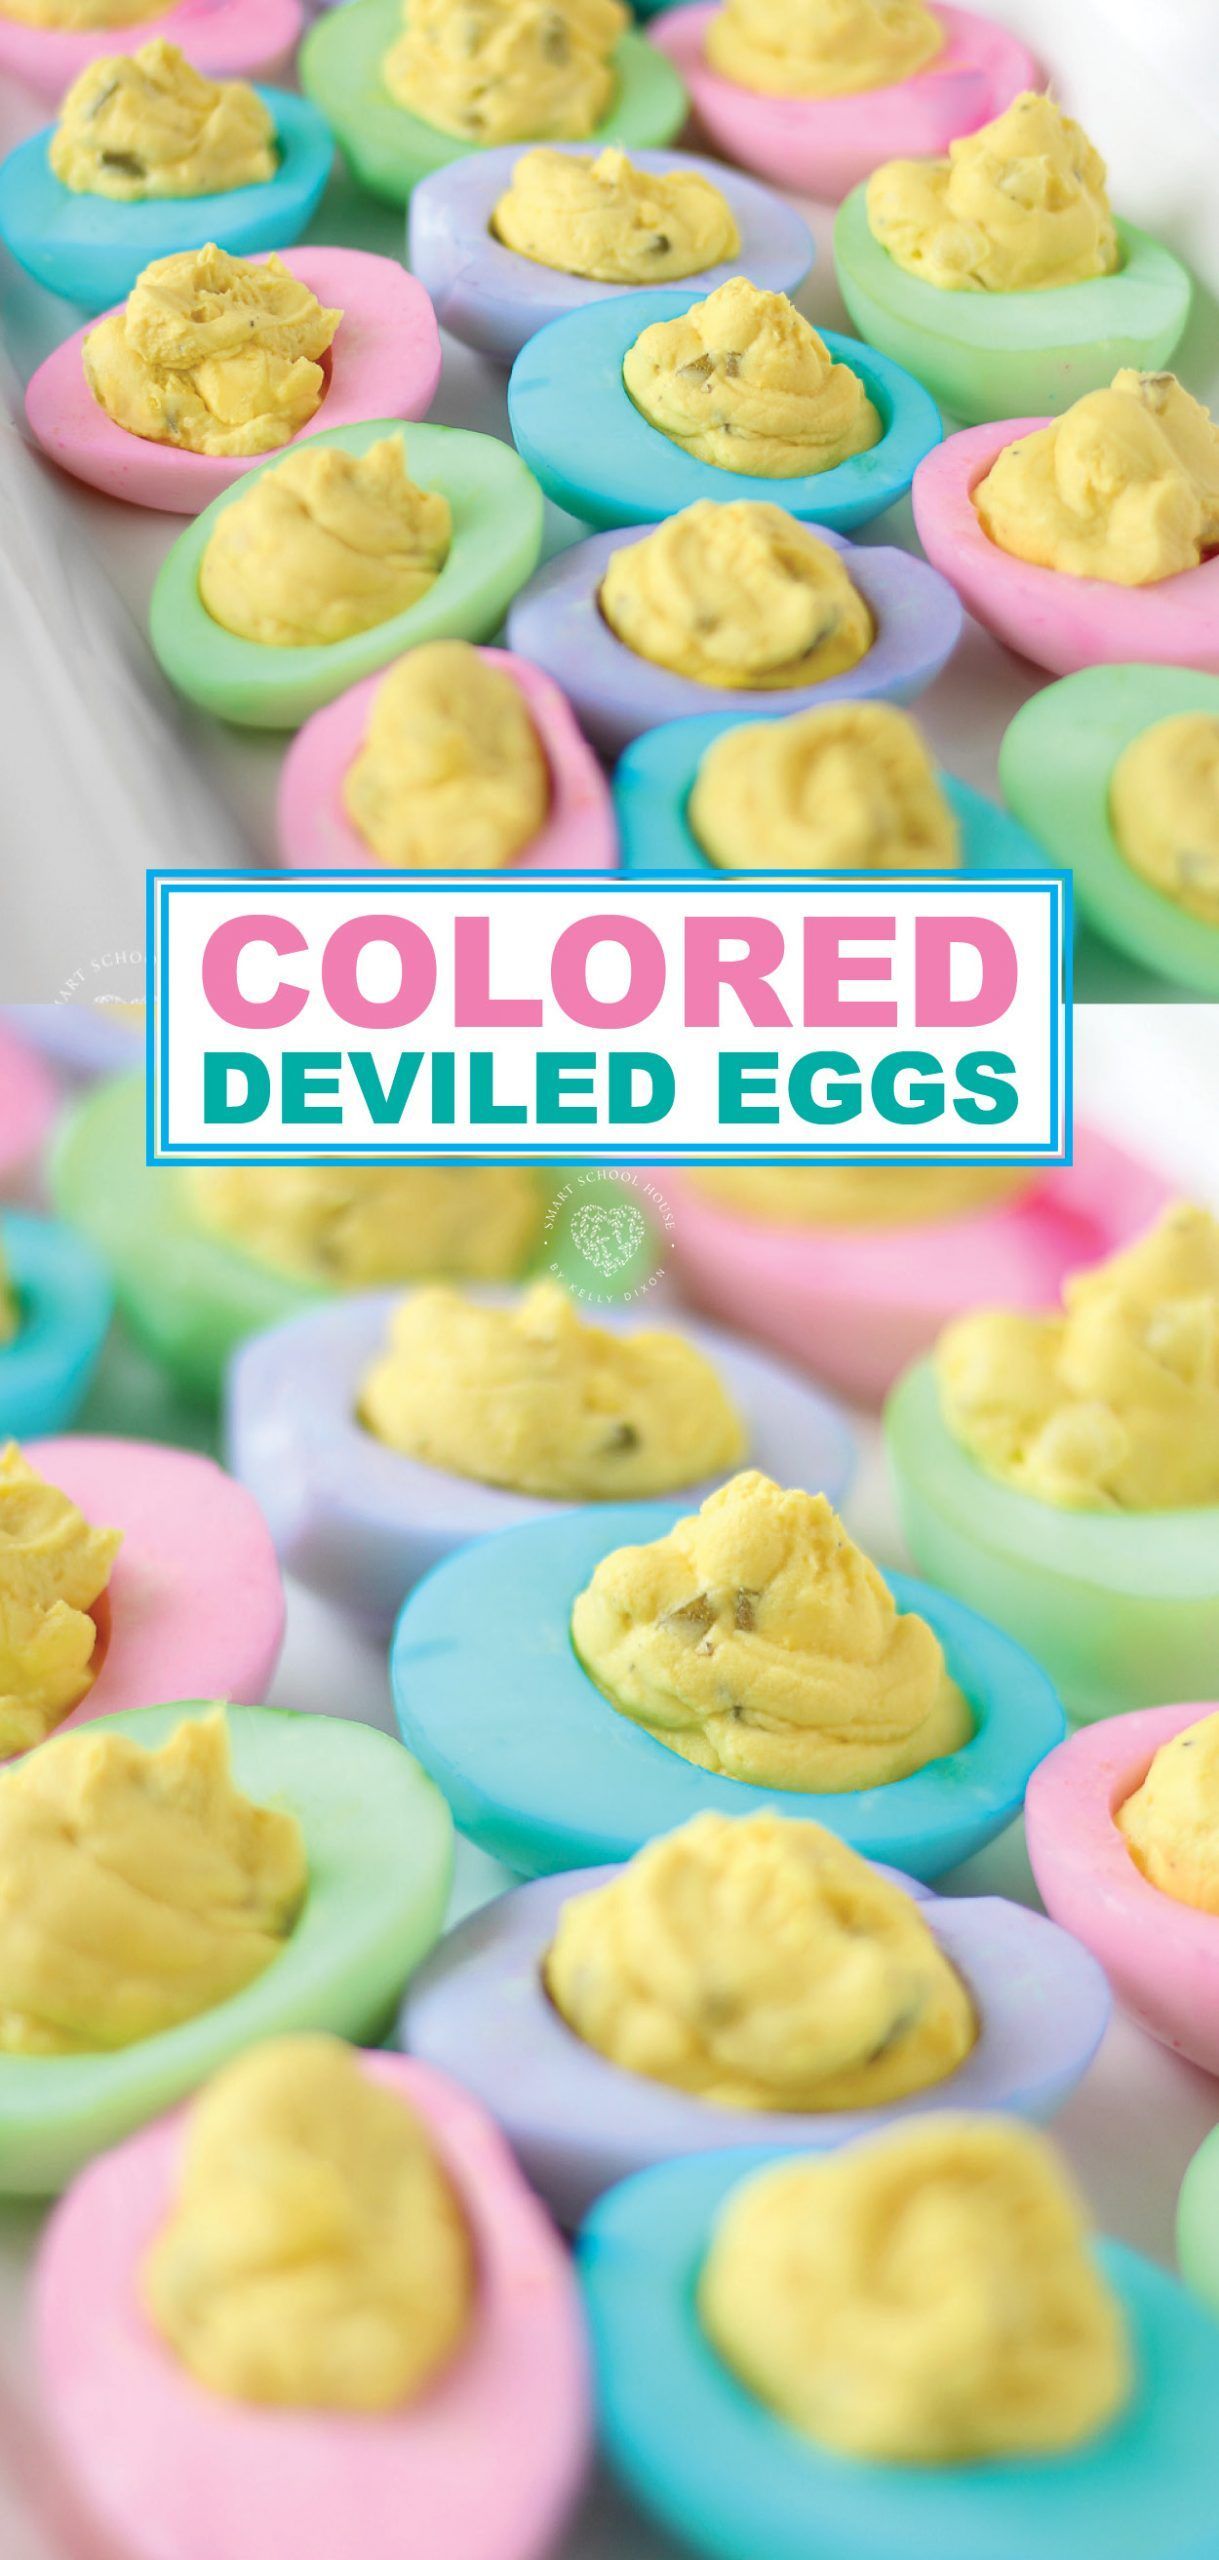 Colored Deviled Eggs for Easter - Colored Deviled Eggs for Easter -   diy Food cute